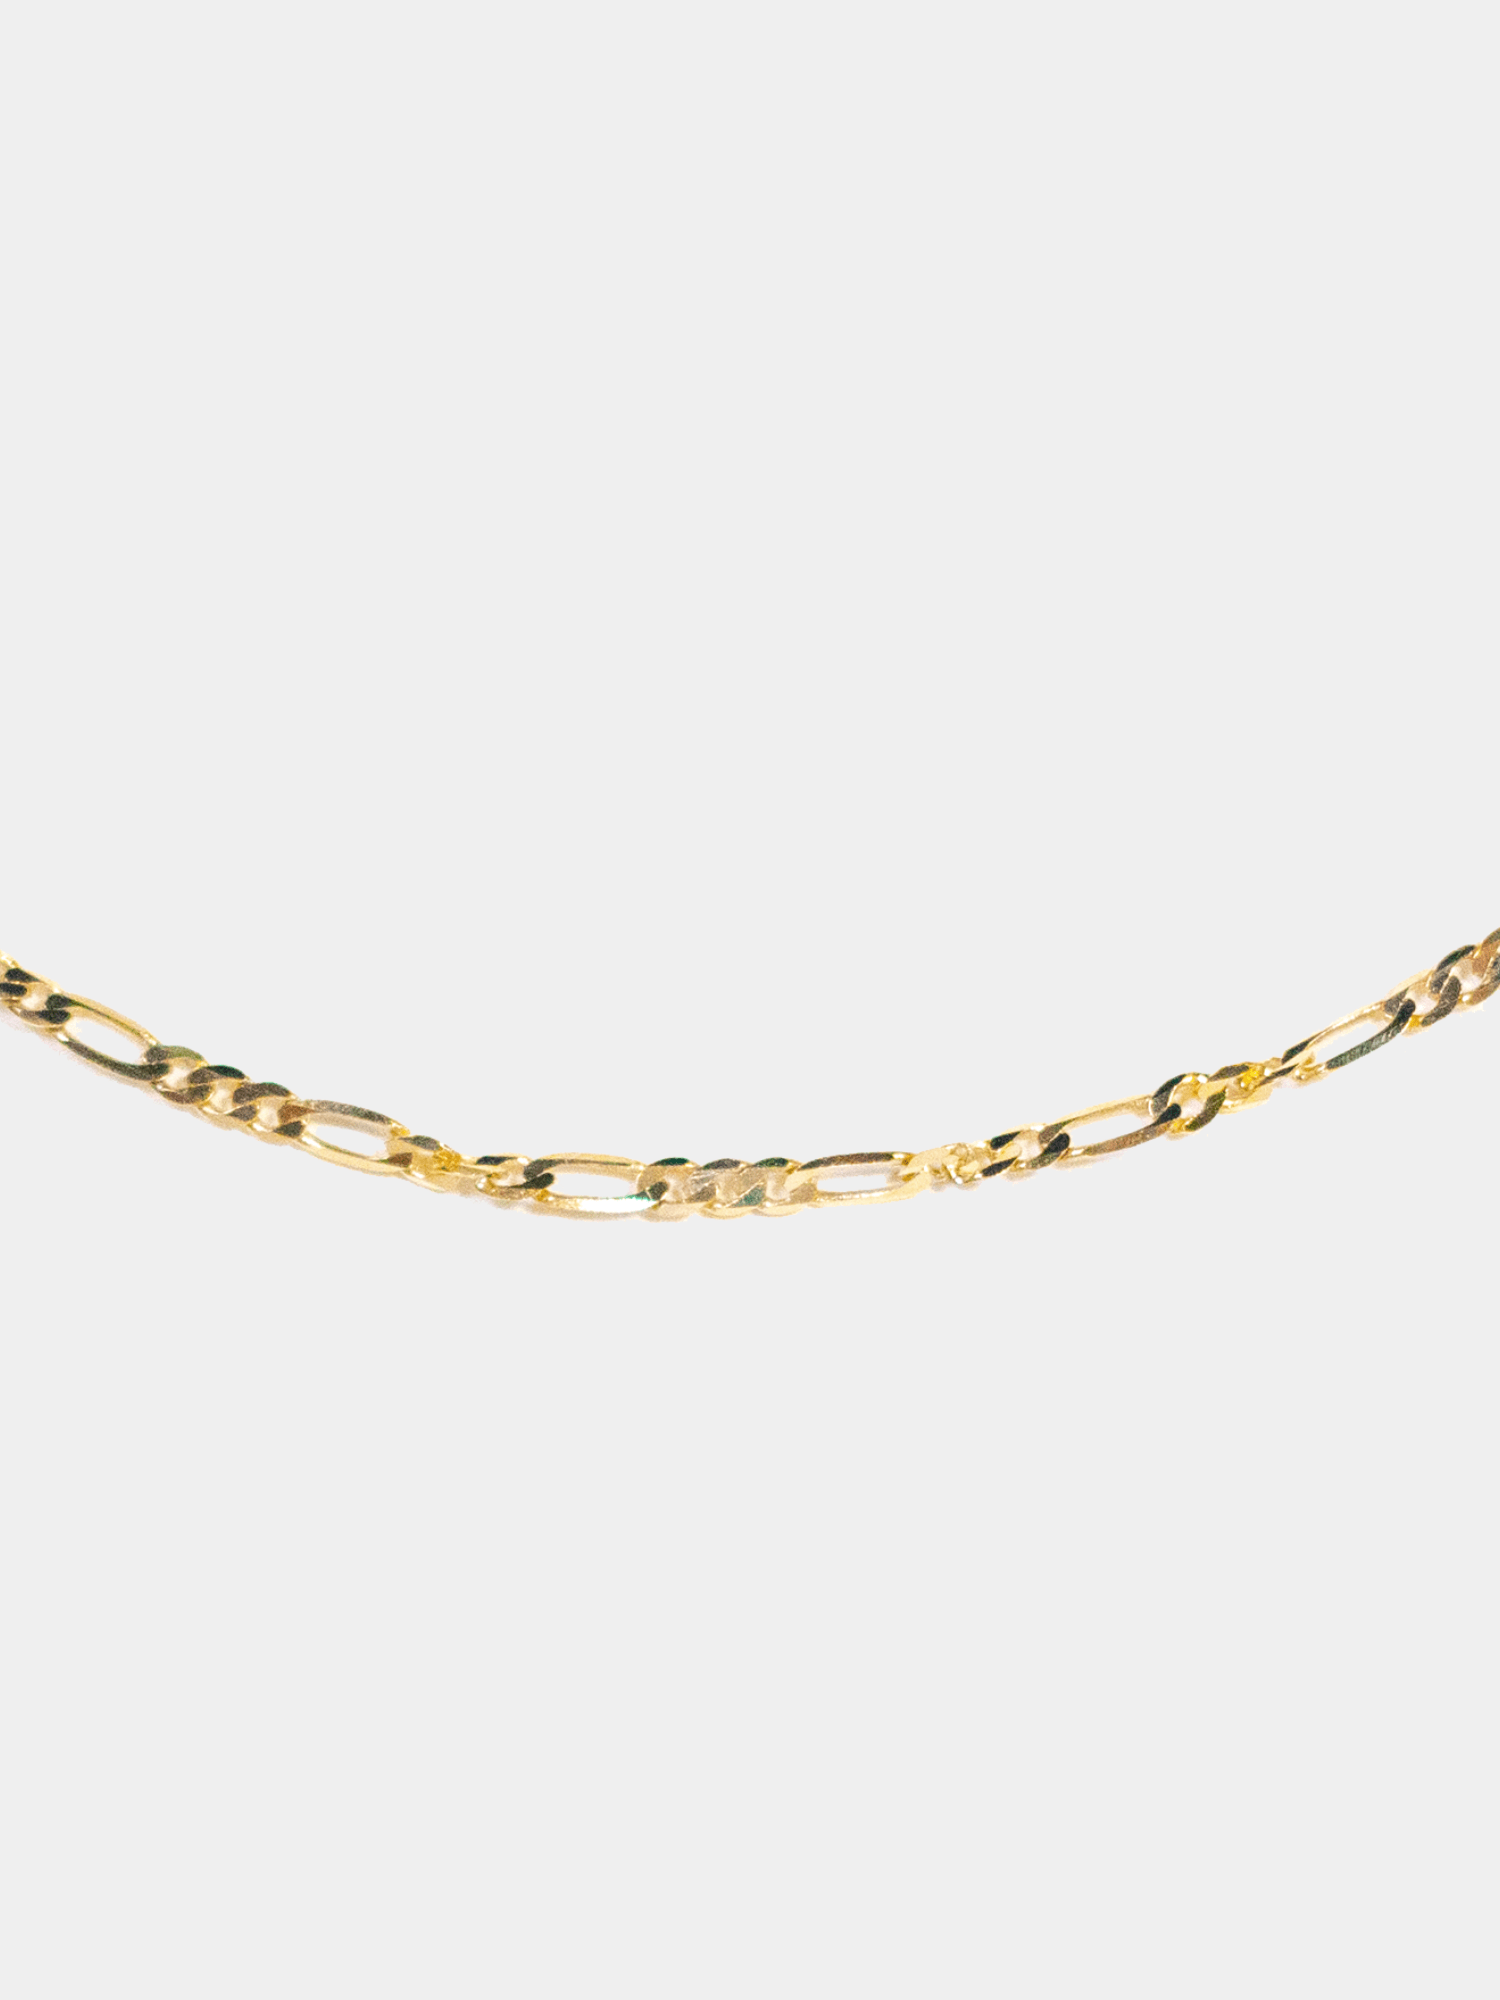 Shop OXB Necklace Figaro Chain